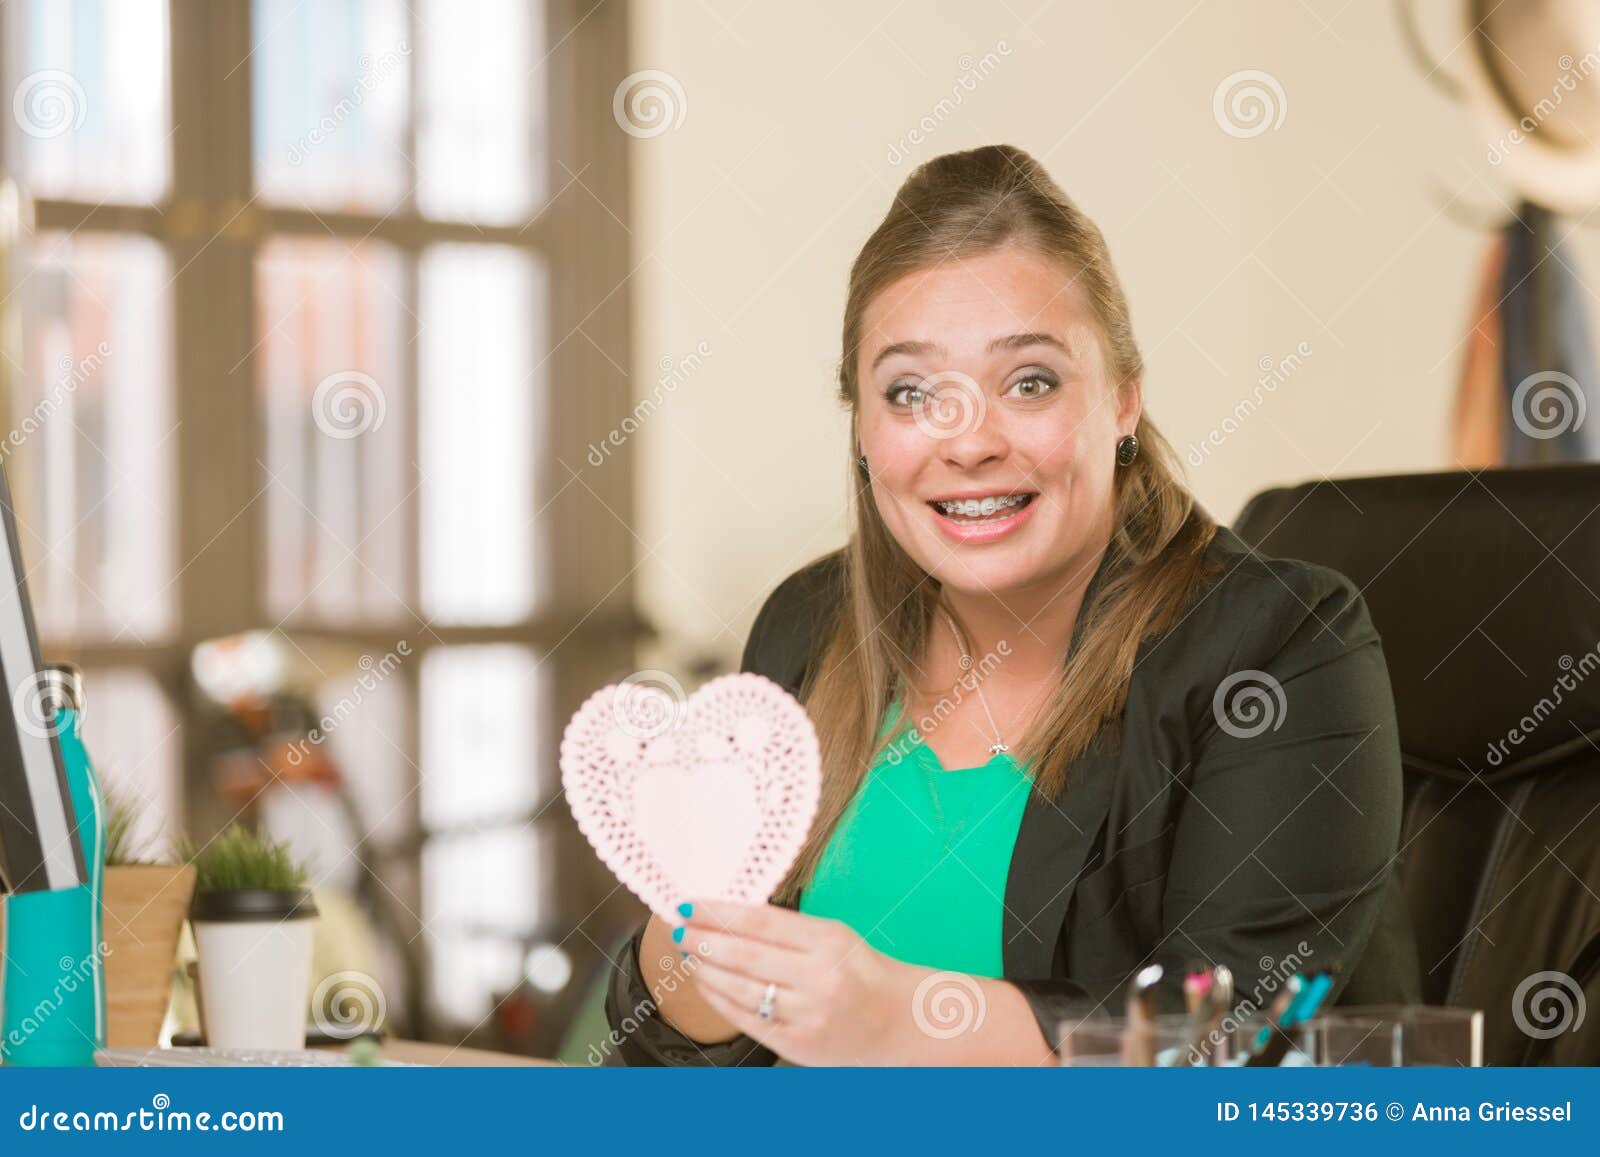 professional woman reacting positively to valentine